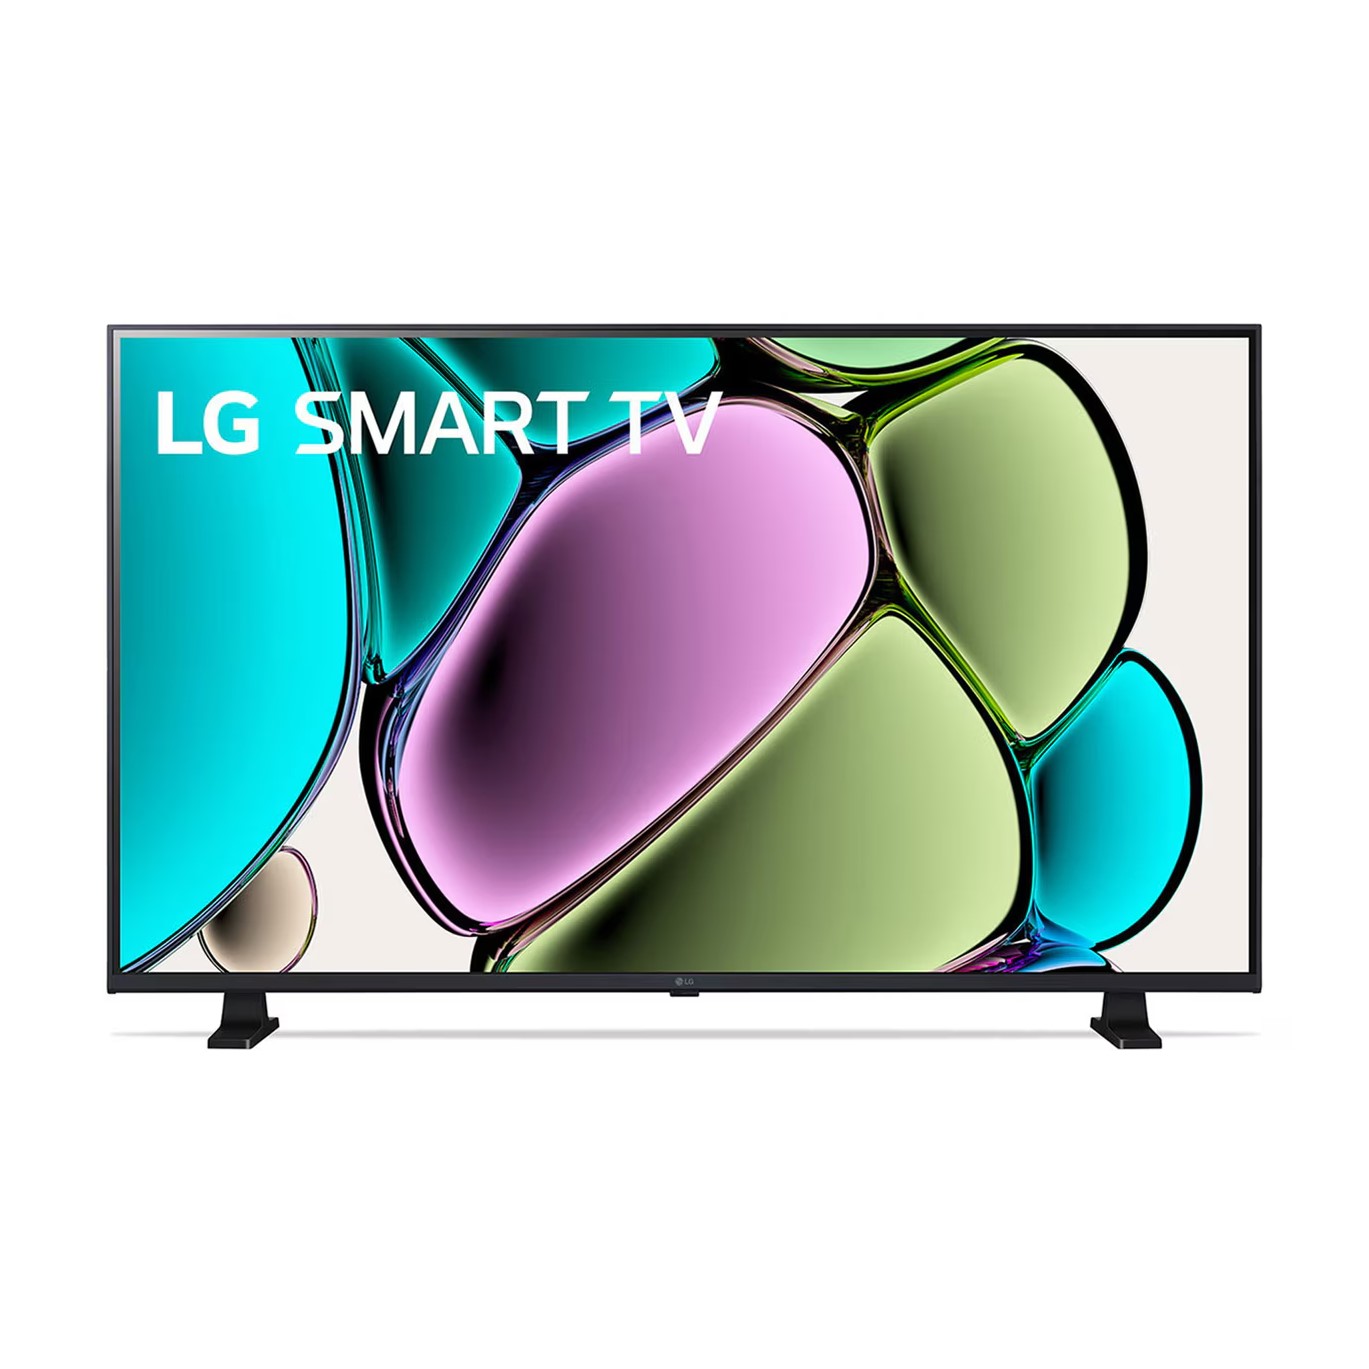 LG LR68 Series 80 cm (32 inches) HD Smart LED TV with webOS 23 | Alexa built-in | HDR10 Pro | Game Optimizer | ThinQ (32LR686BPSA.ATR)